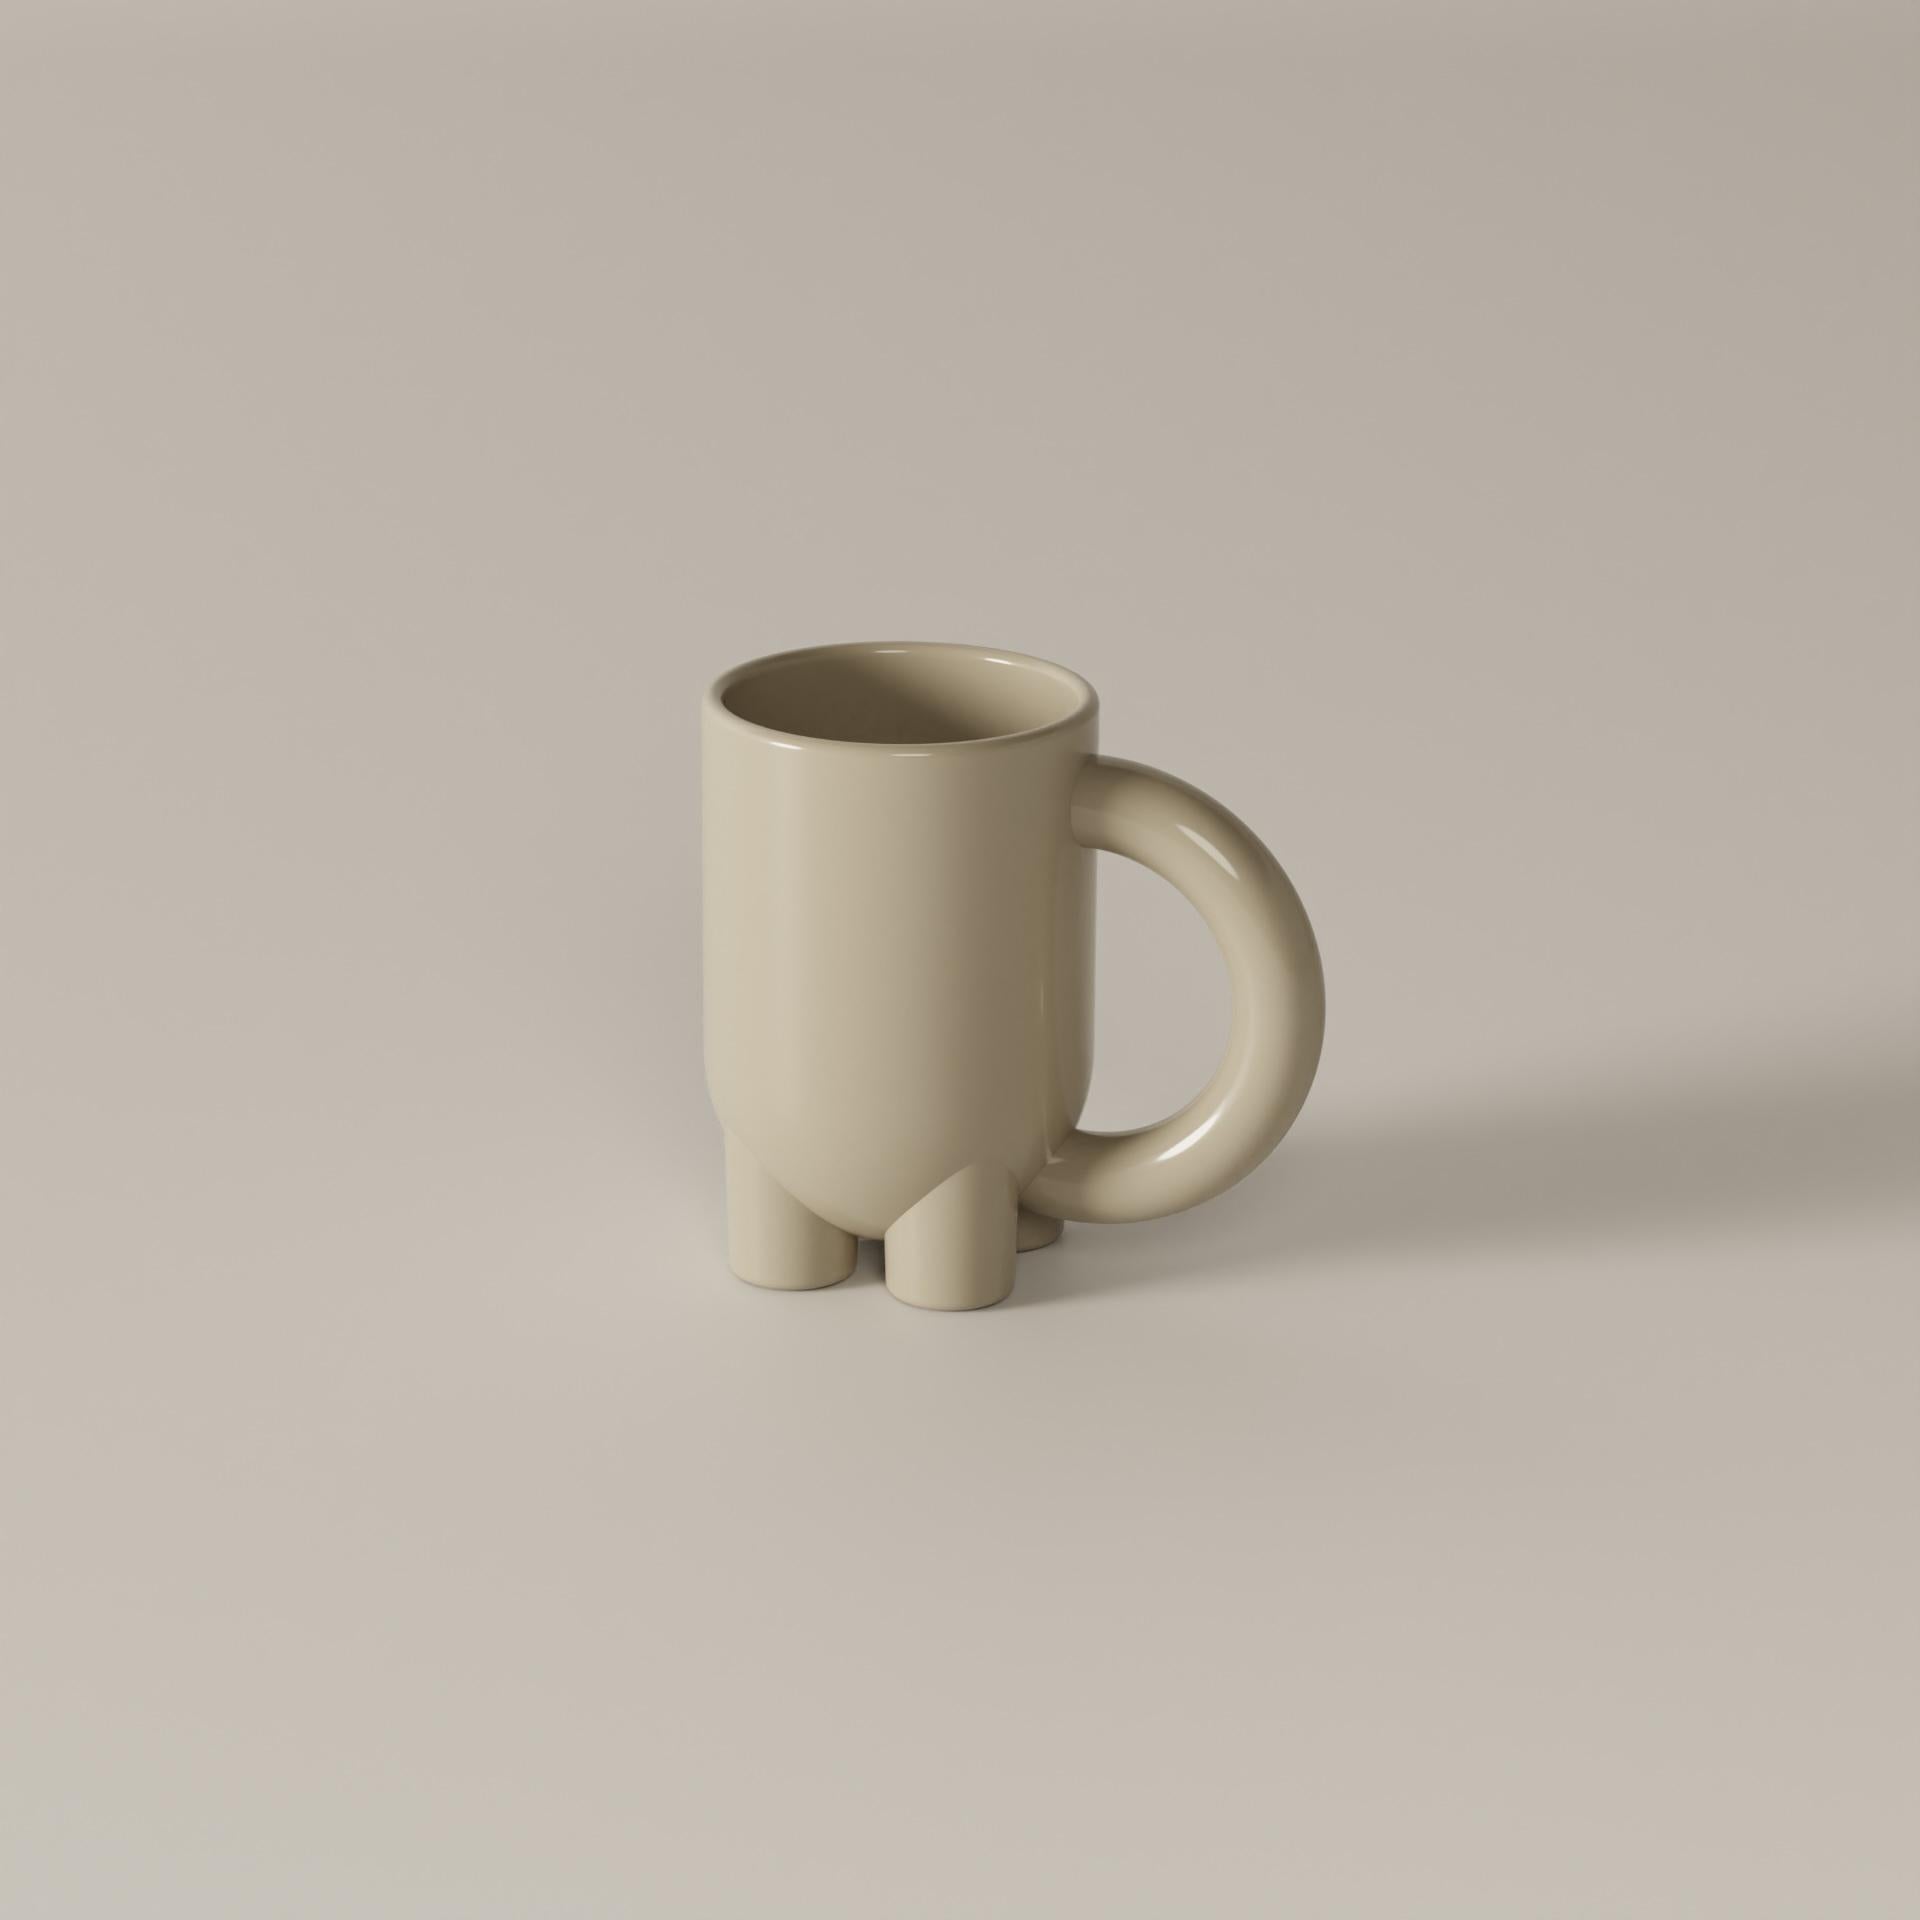 Drawing inspiration from the coffee traditions of Italy and Iran, this tall stoneware cup has a modern spirit. Simple geometric shapes, clean lines, and a unique design make mUUUUg a decorative object as well as a perfect tool for ritual, morning